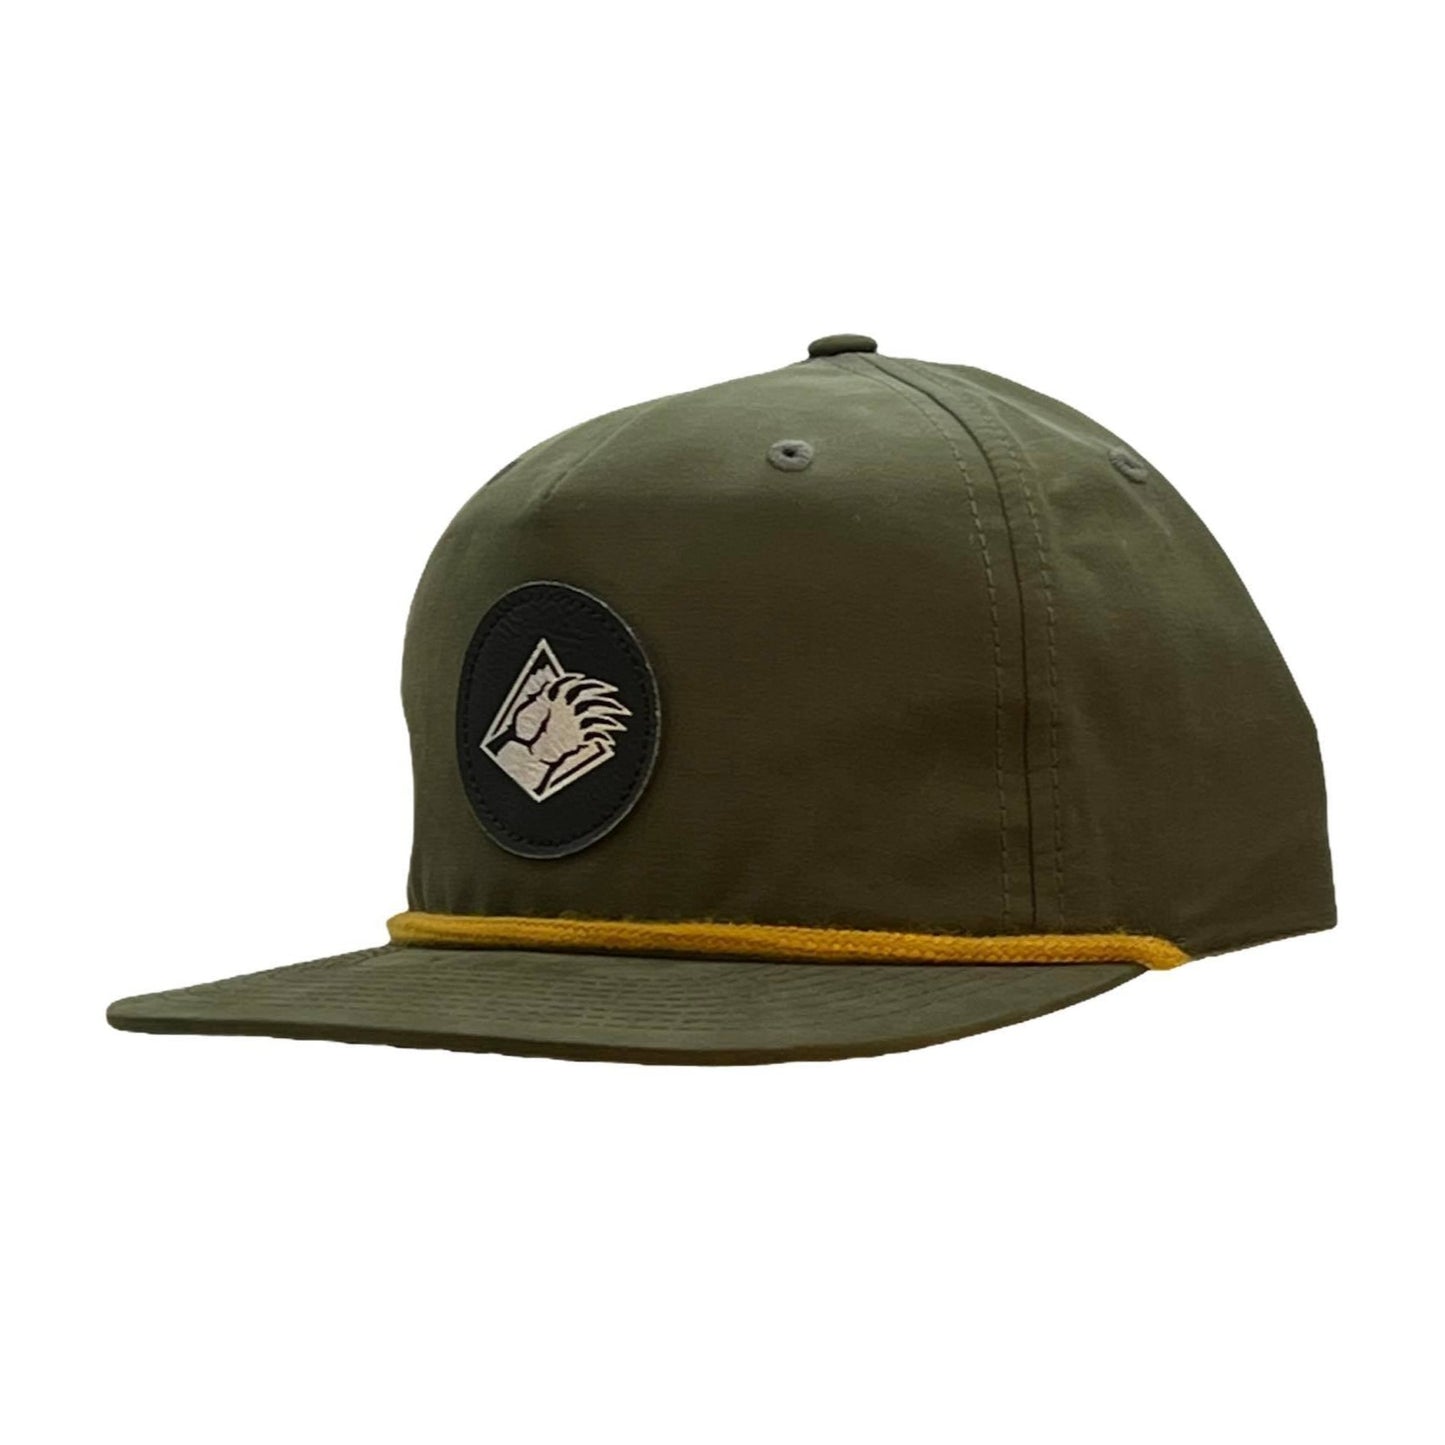 Forest green hat with Bear claw logo and yellow rope on mid crown.